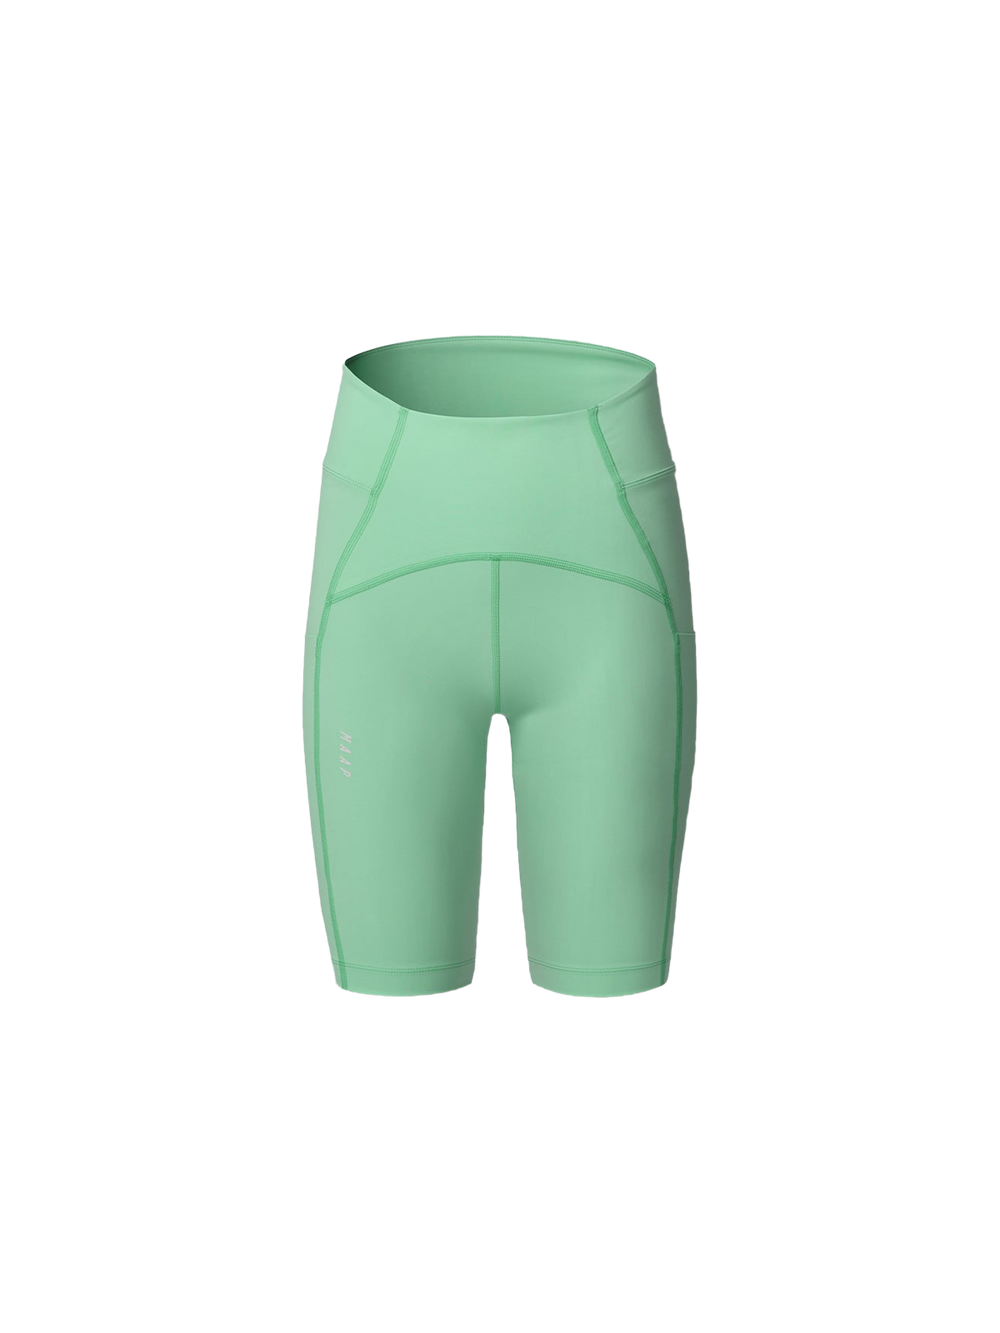 Product Image for Women's Everyday Short